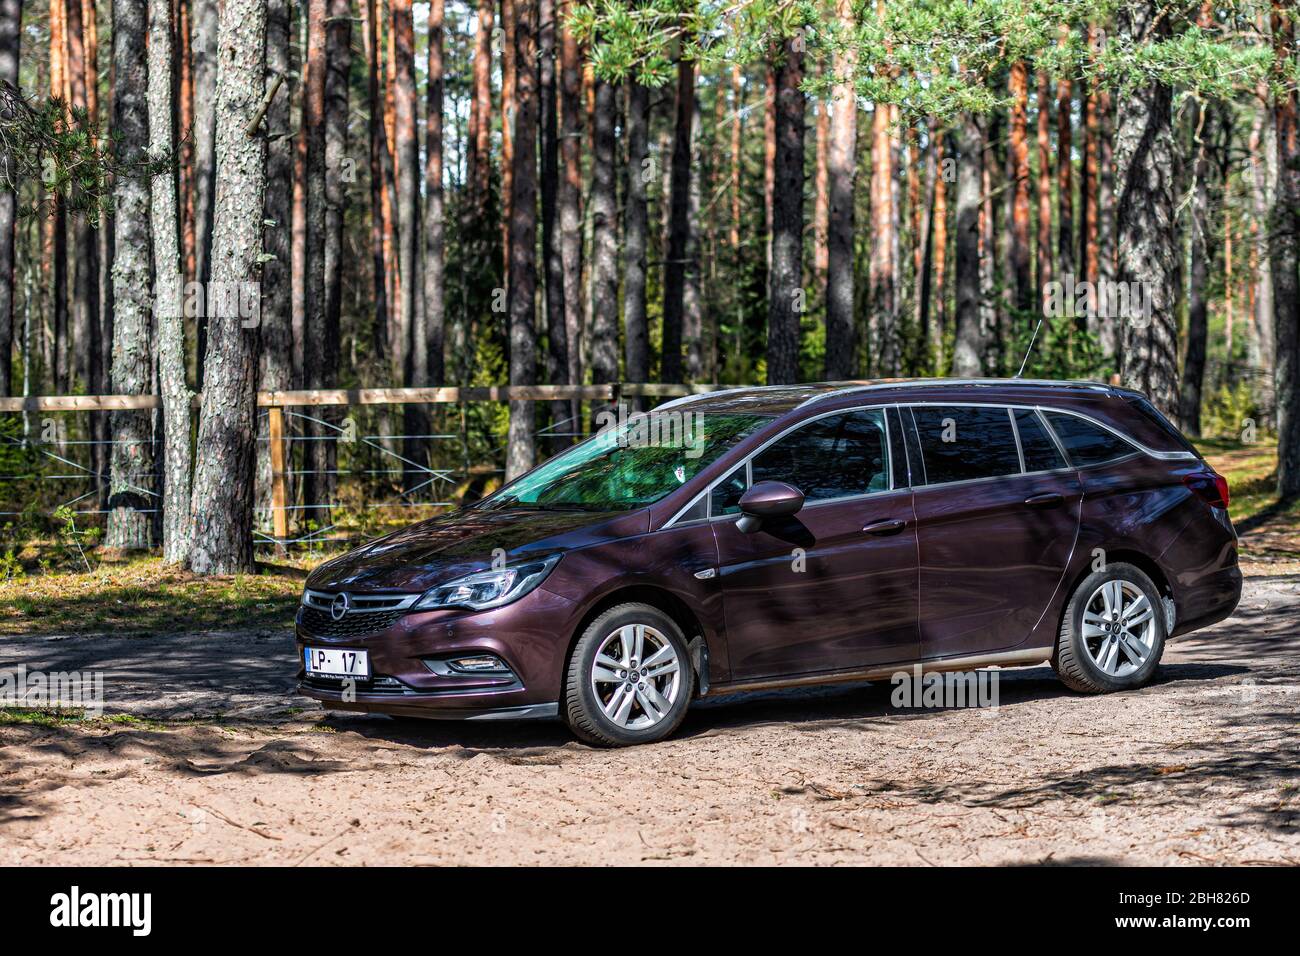 Galkalne, Latvia - April 22, 2020: brown shiny car Opel Astra Sport Tourer  parked in forest roadside on blurred bokeh background on bright sunny day, Stock Photo